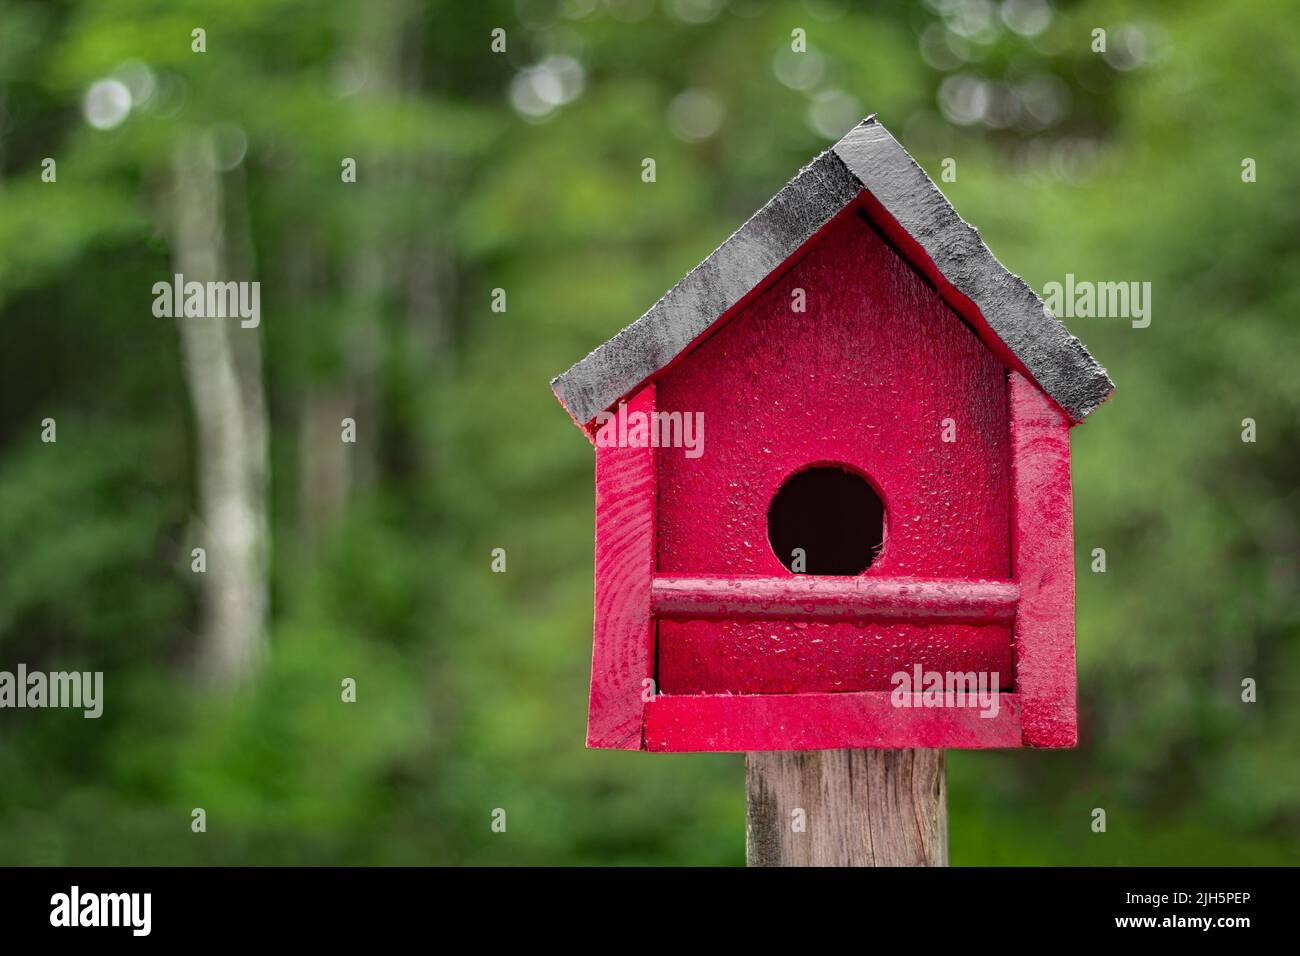 Homemade wooden birdhouse with foliage background and copy space Stock Photo